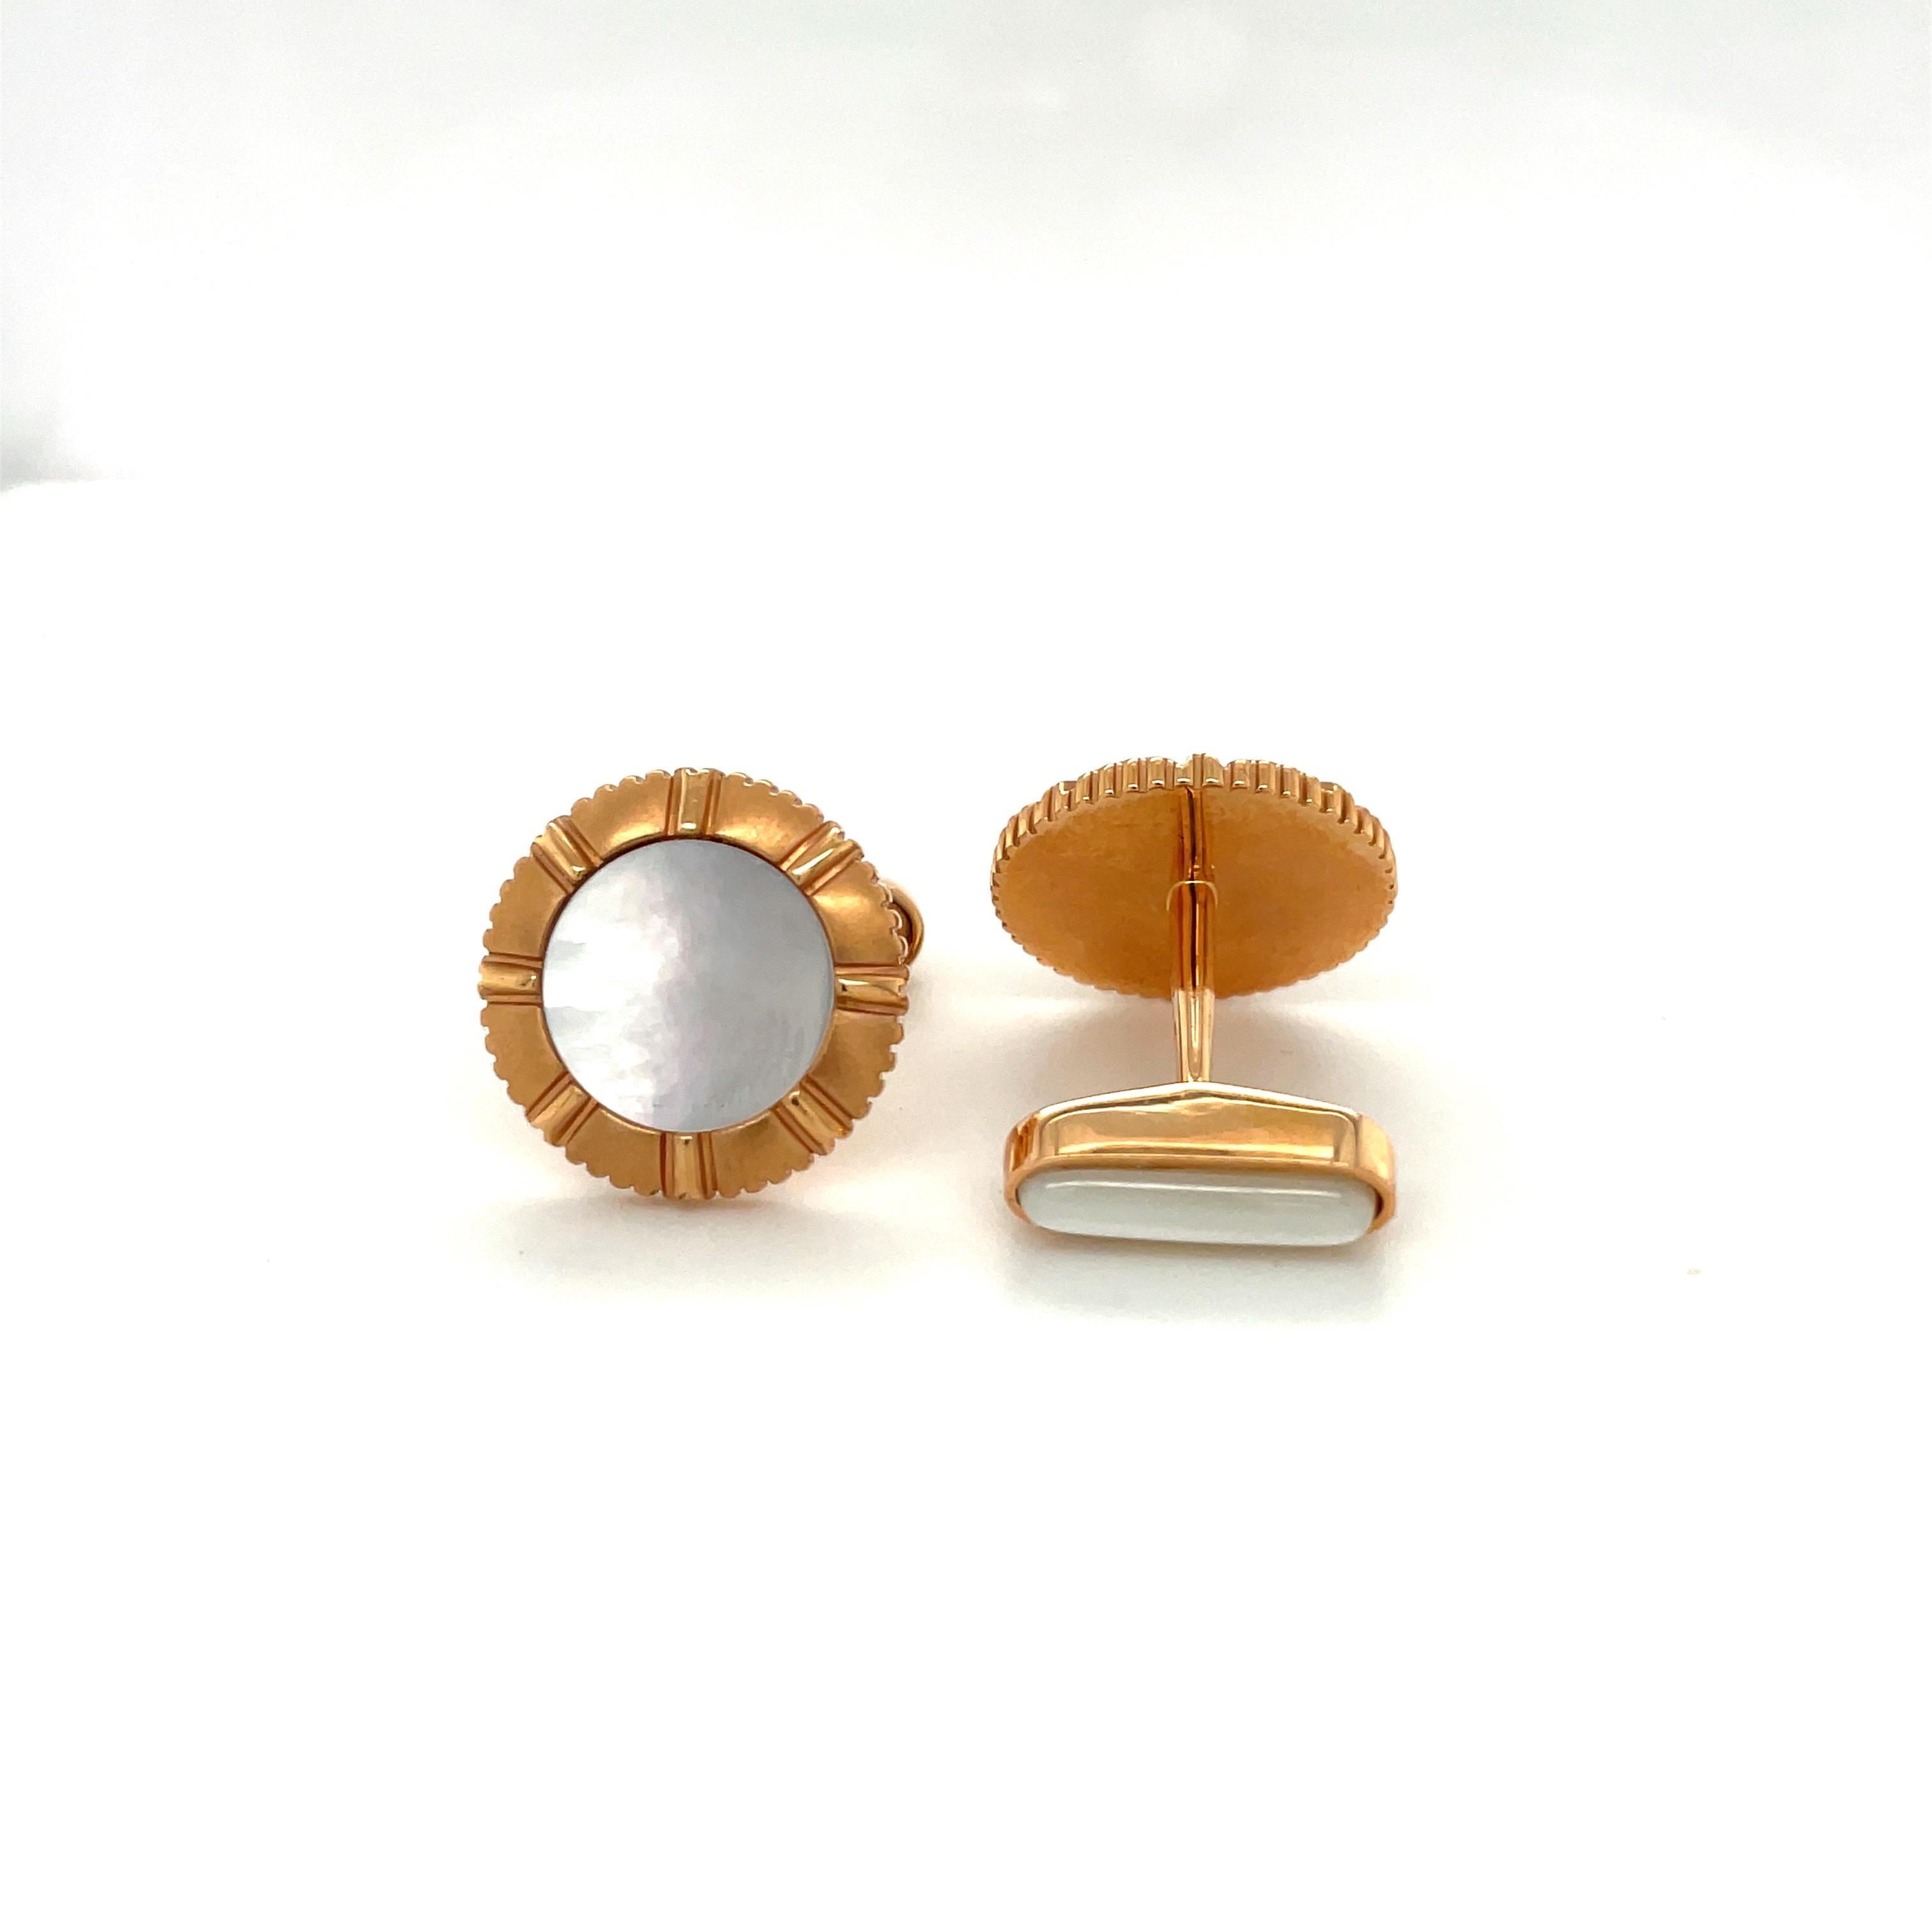 George Gero 18KT Rose Gold & Pinctada Maxima Cuff-Links / Studs Dress Set In New Condition For Sale In New York, NY